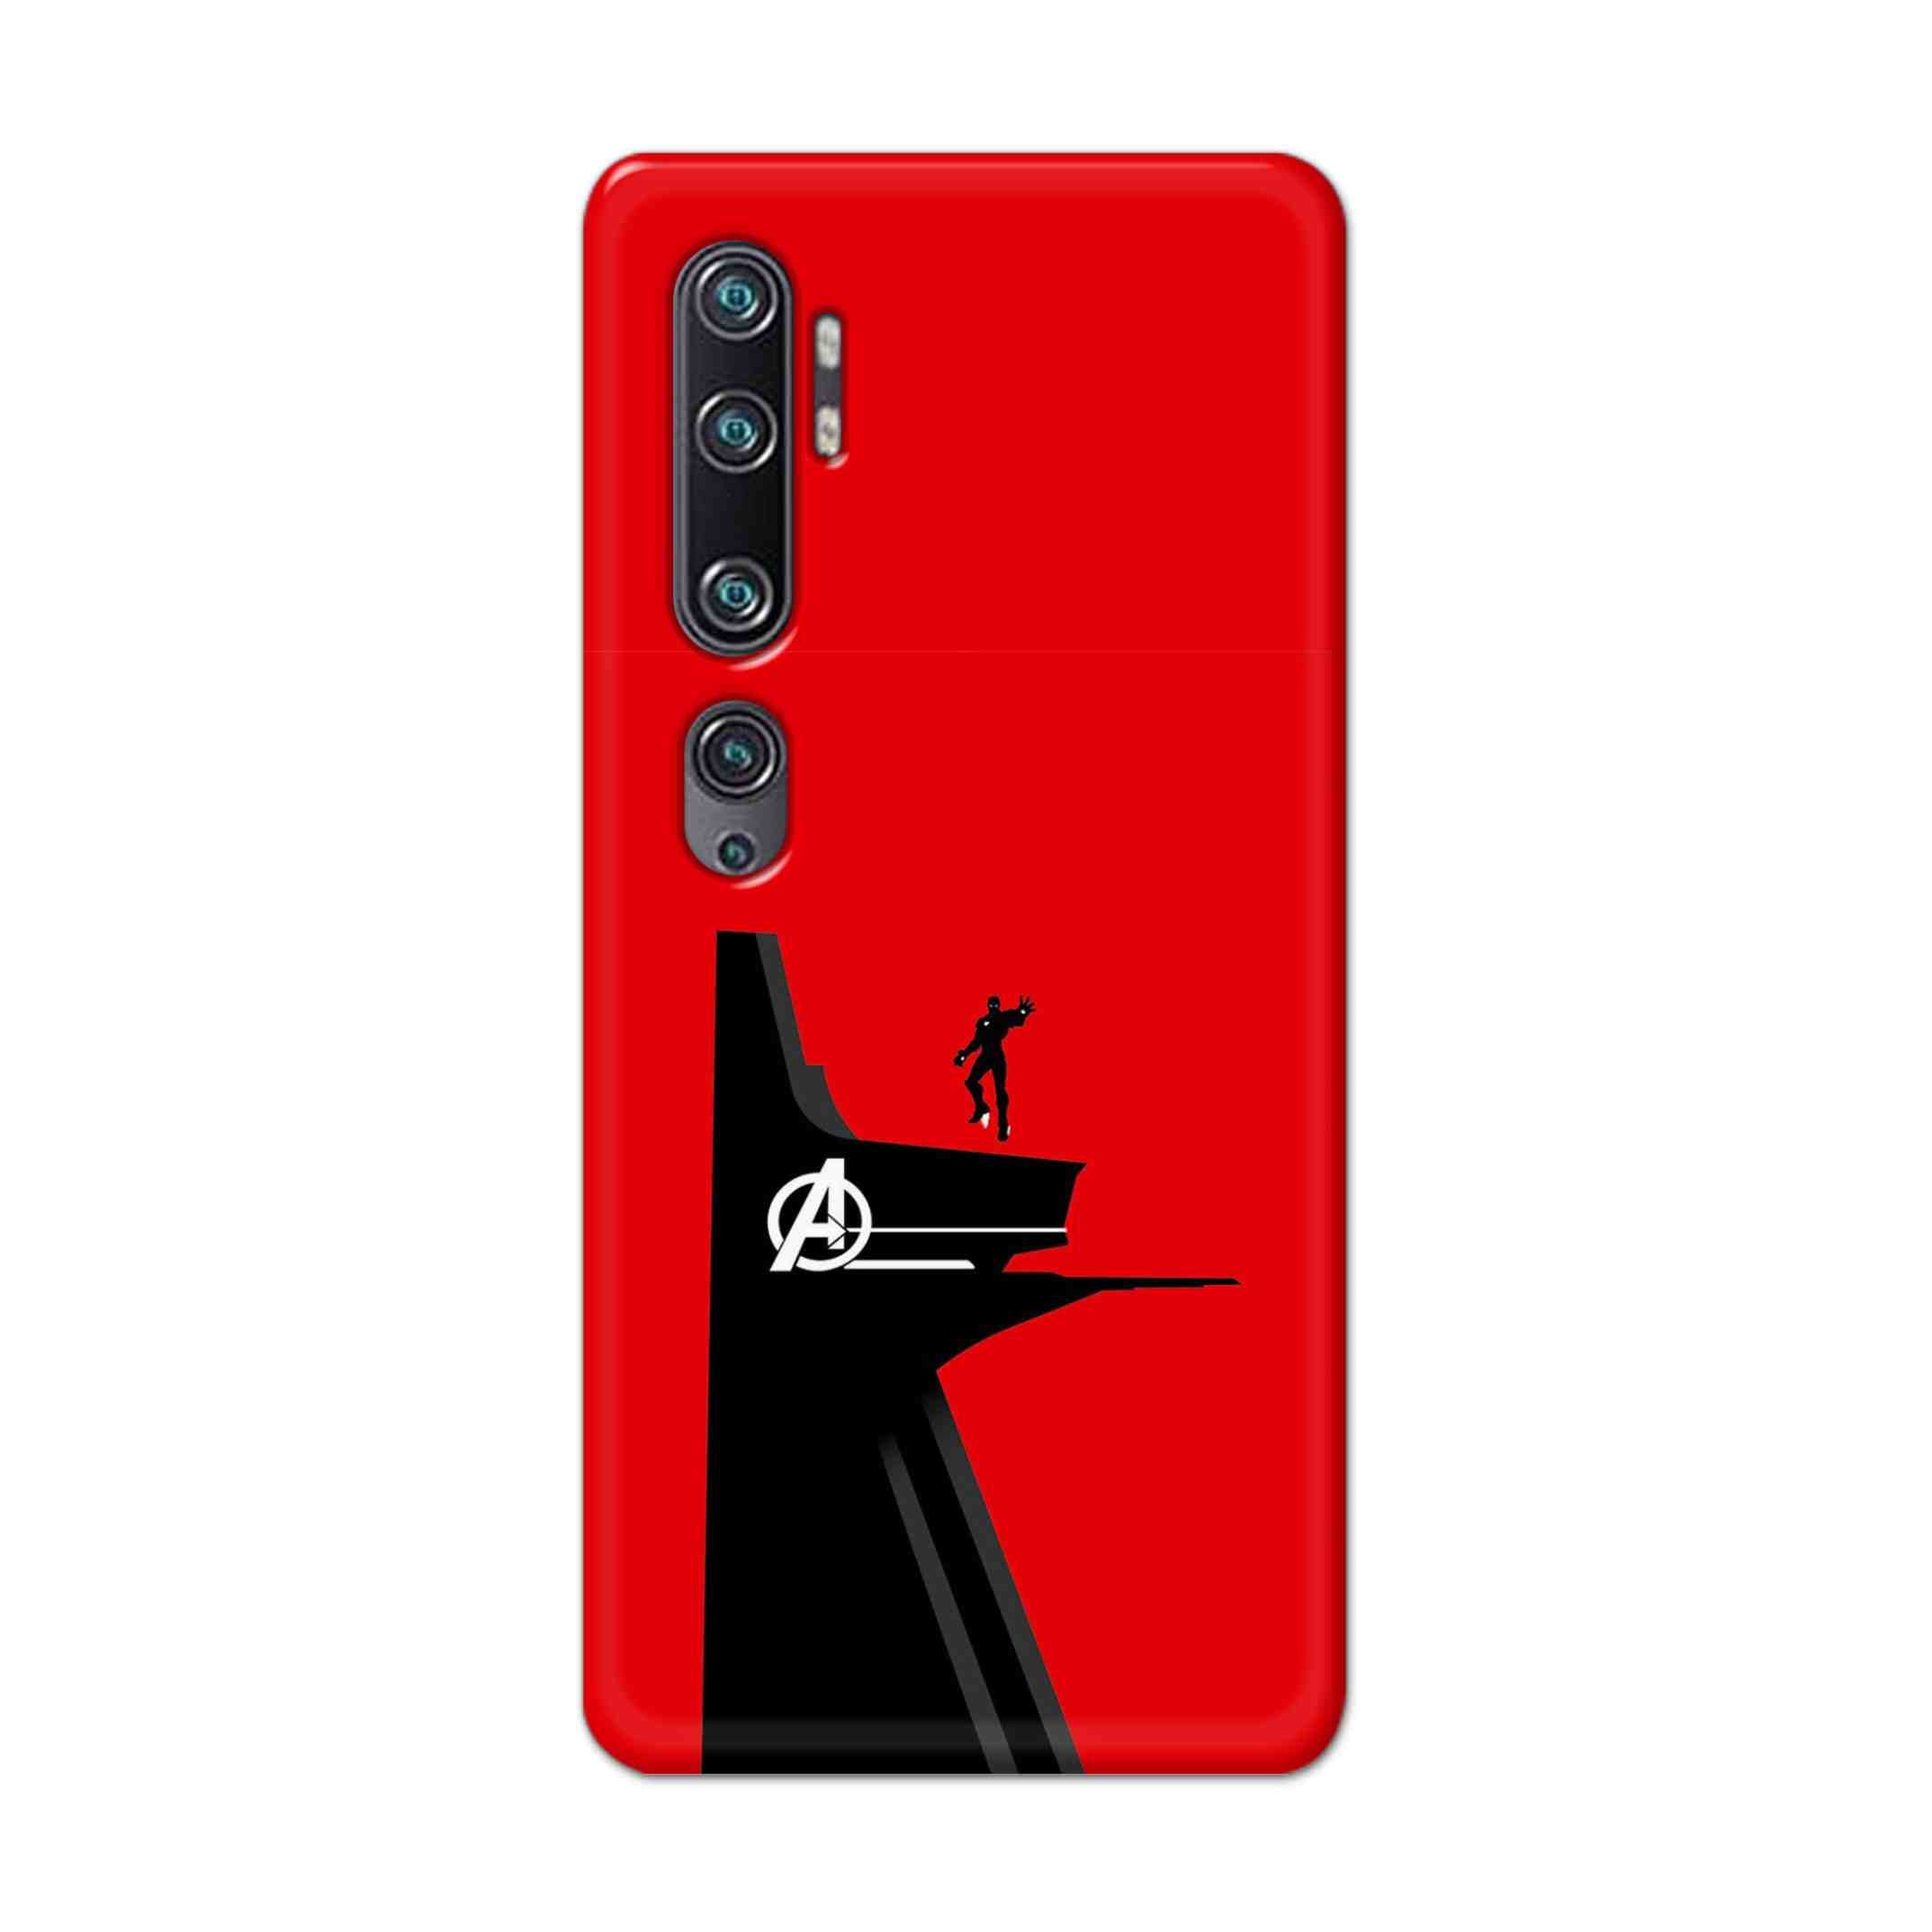 Buy Iron Man Hard Back Mobile Phone Case Cover For Xiaomi Mi Note 10 Online